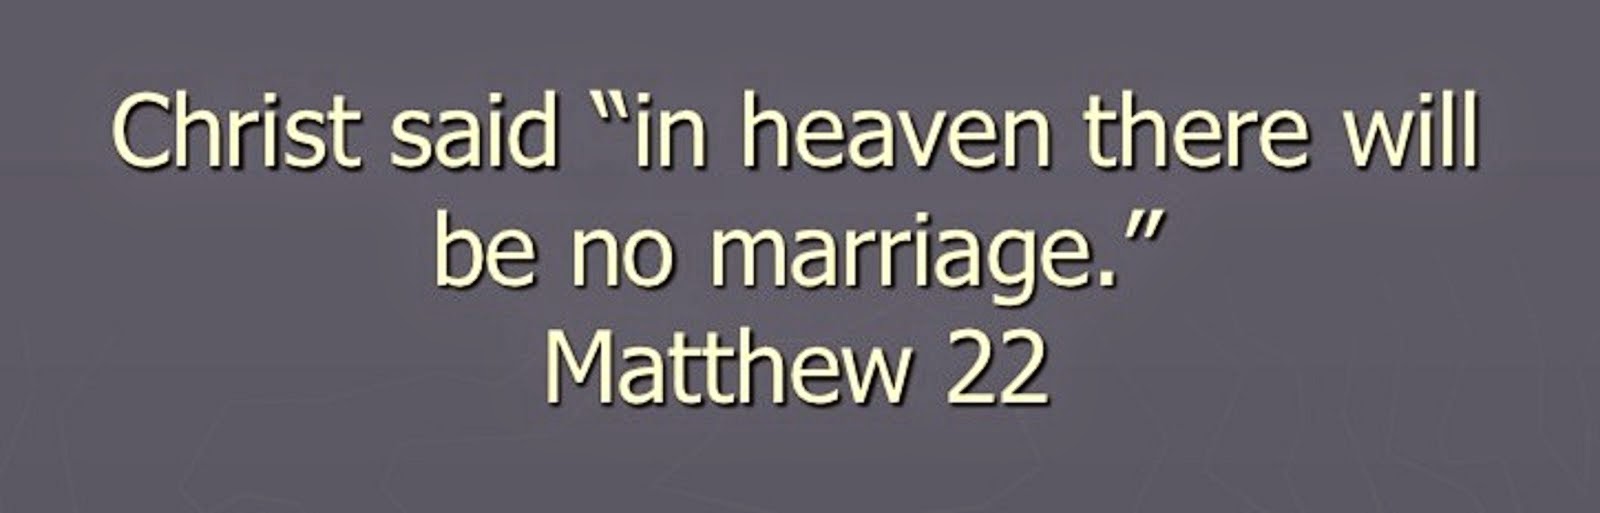 JESUS SAID, "IN HEAVEN THERE WILL BE NO MARRIAGE" MATTHEW 22